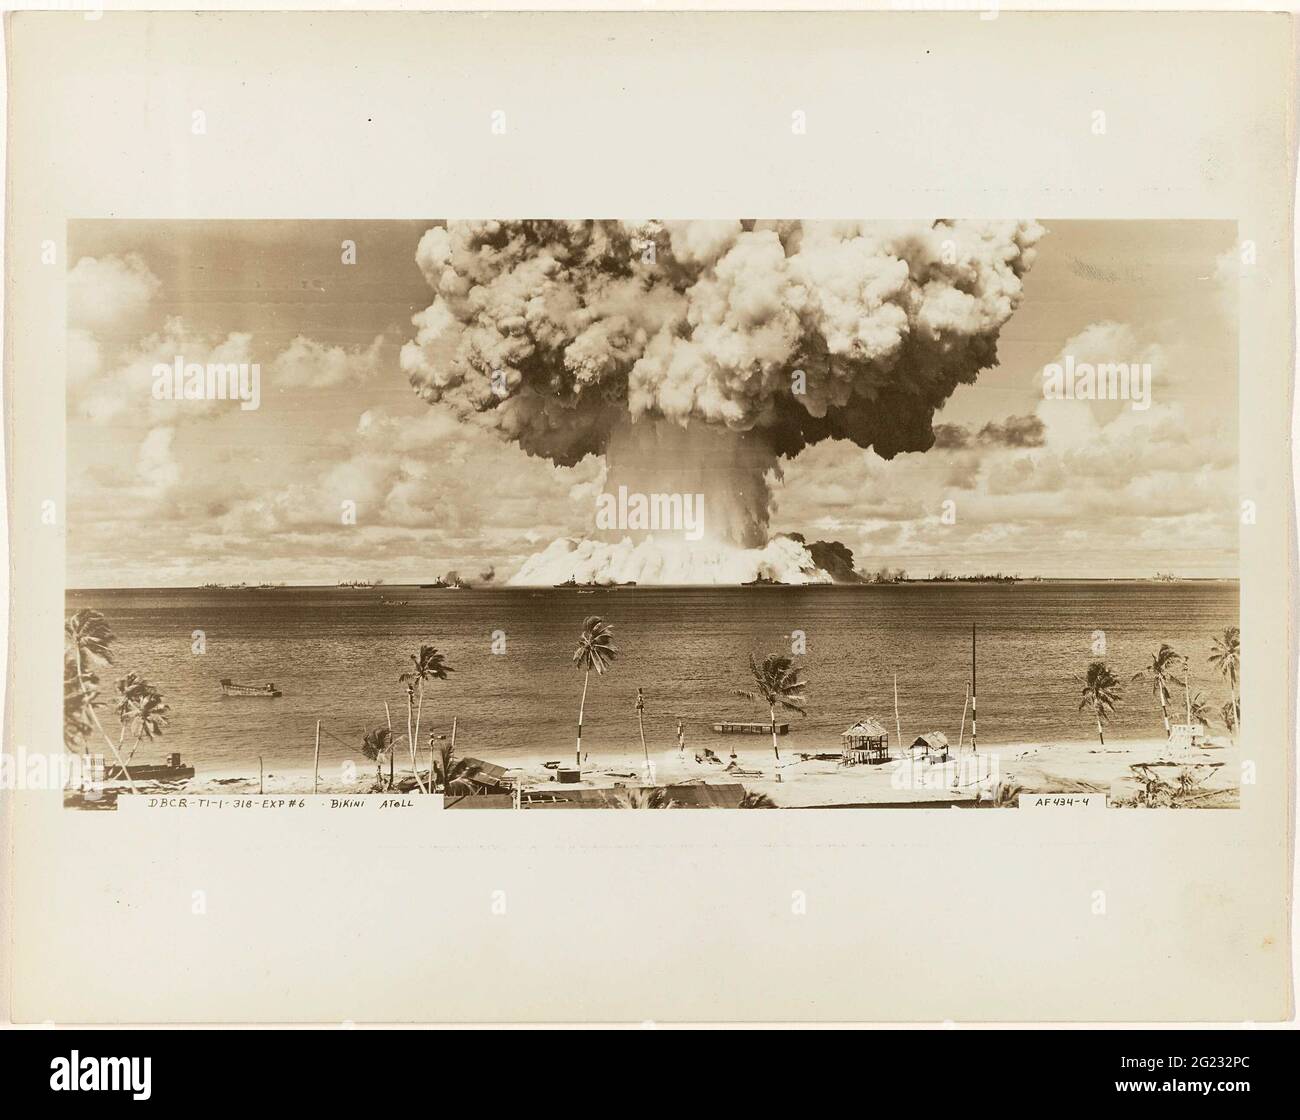 Atomic Bomb Test during Operation Crossroads. Between 1946 and 1958 the United States experimented with nuclear weapons on Bikini Island in the Pacific. On 25 July 1946 an atomic bomb was exploded underwater along the coast. These images were printed in large format in Life magazine, with the caption: ‘It was perhaps the most awesome man-made spectacle ever photographed.’ These photographs allowed the public at large to see the destructive power of the atomic bomb for the first time. Stock Photo